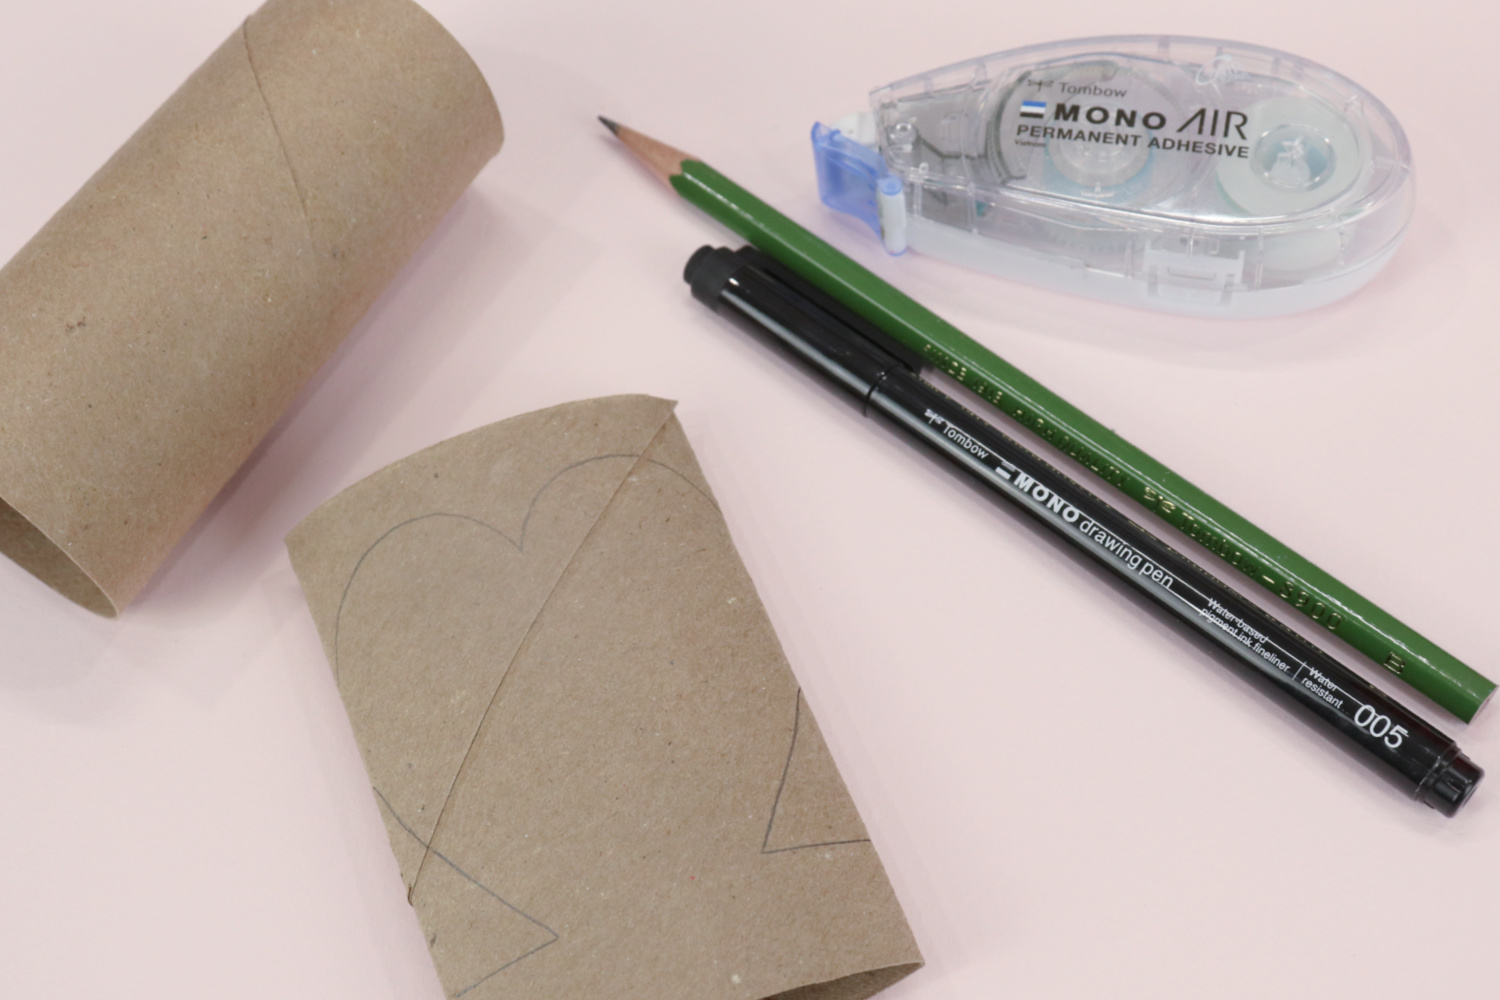 Image contains two empty toilet paper rolls, one of which is flattened with a heart shape sketched on top. A Tombow Pencil, Tombow MONO Drawing Pen, and adhesive runner sit nearby on a light pink background.